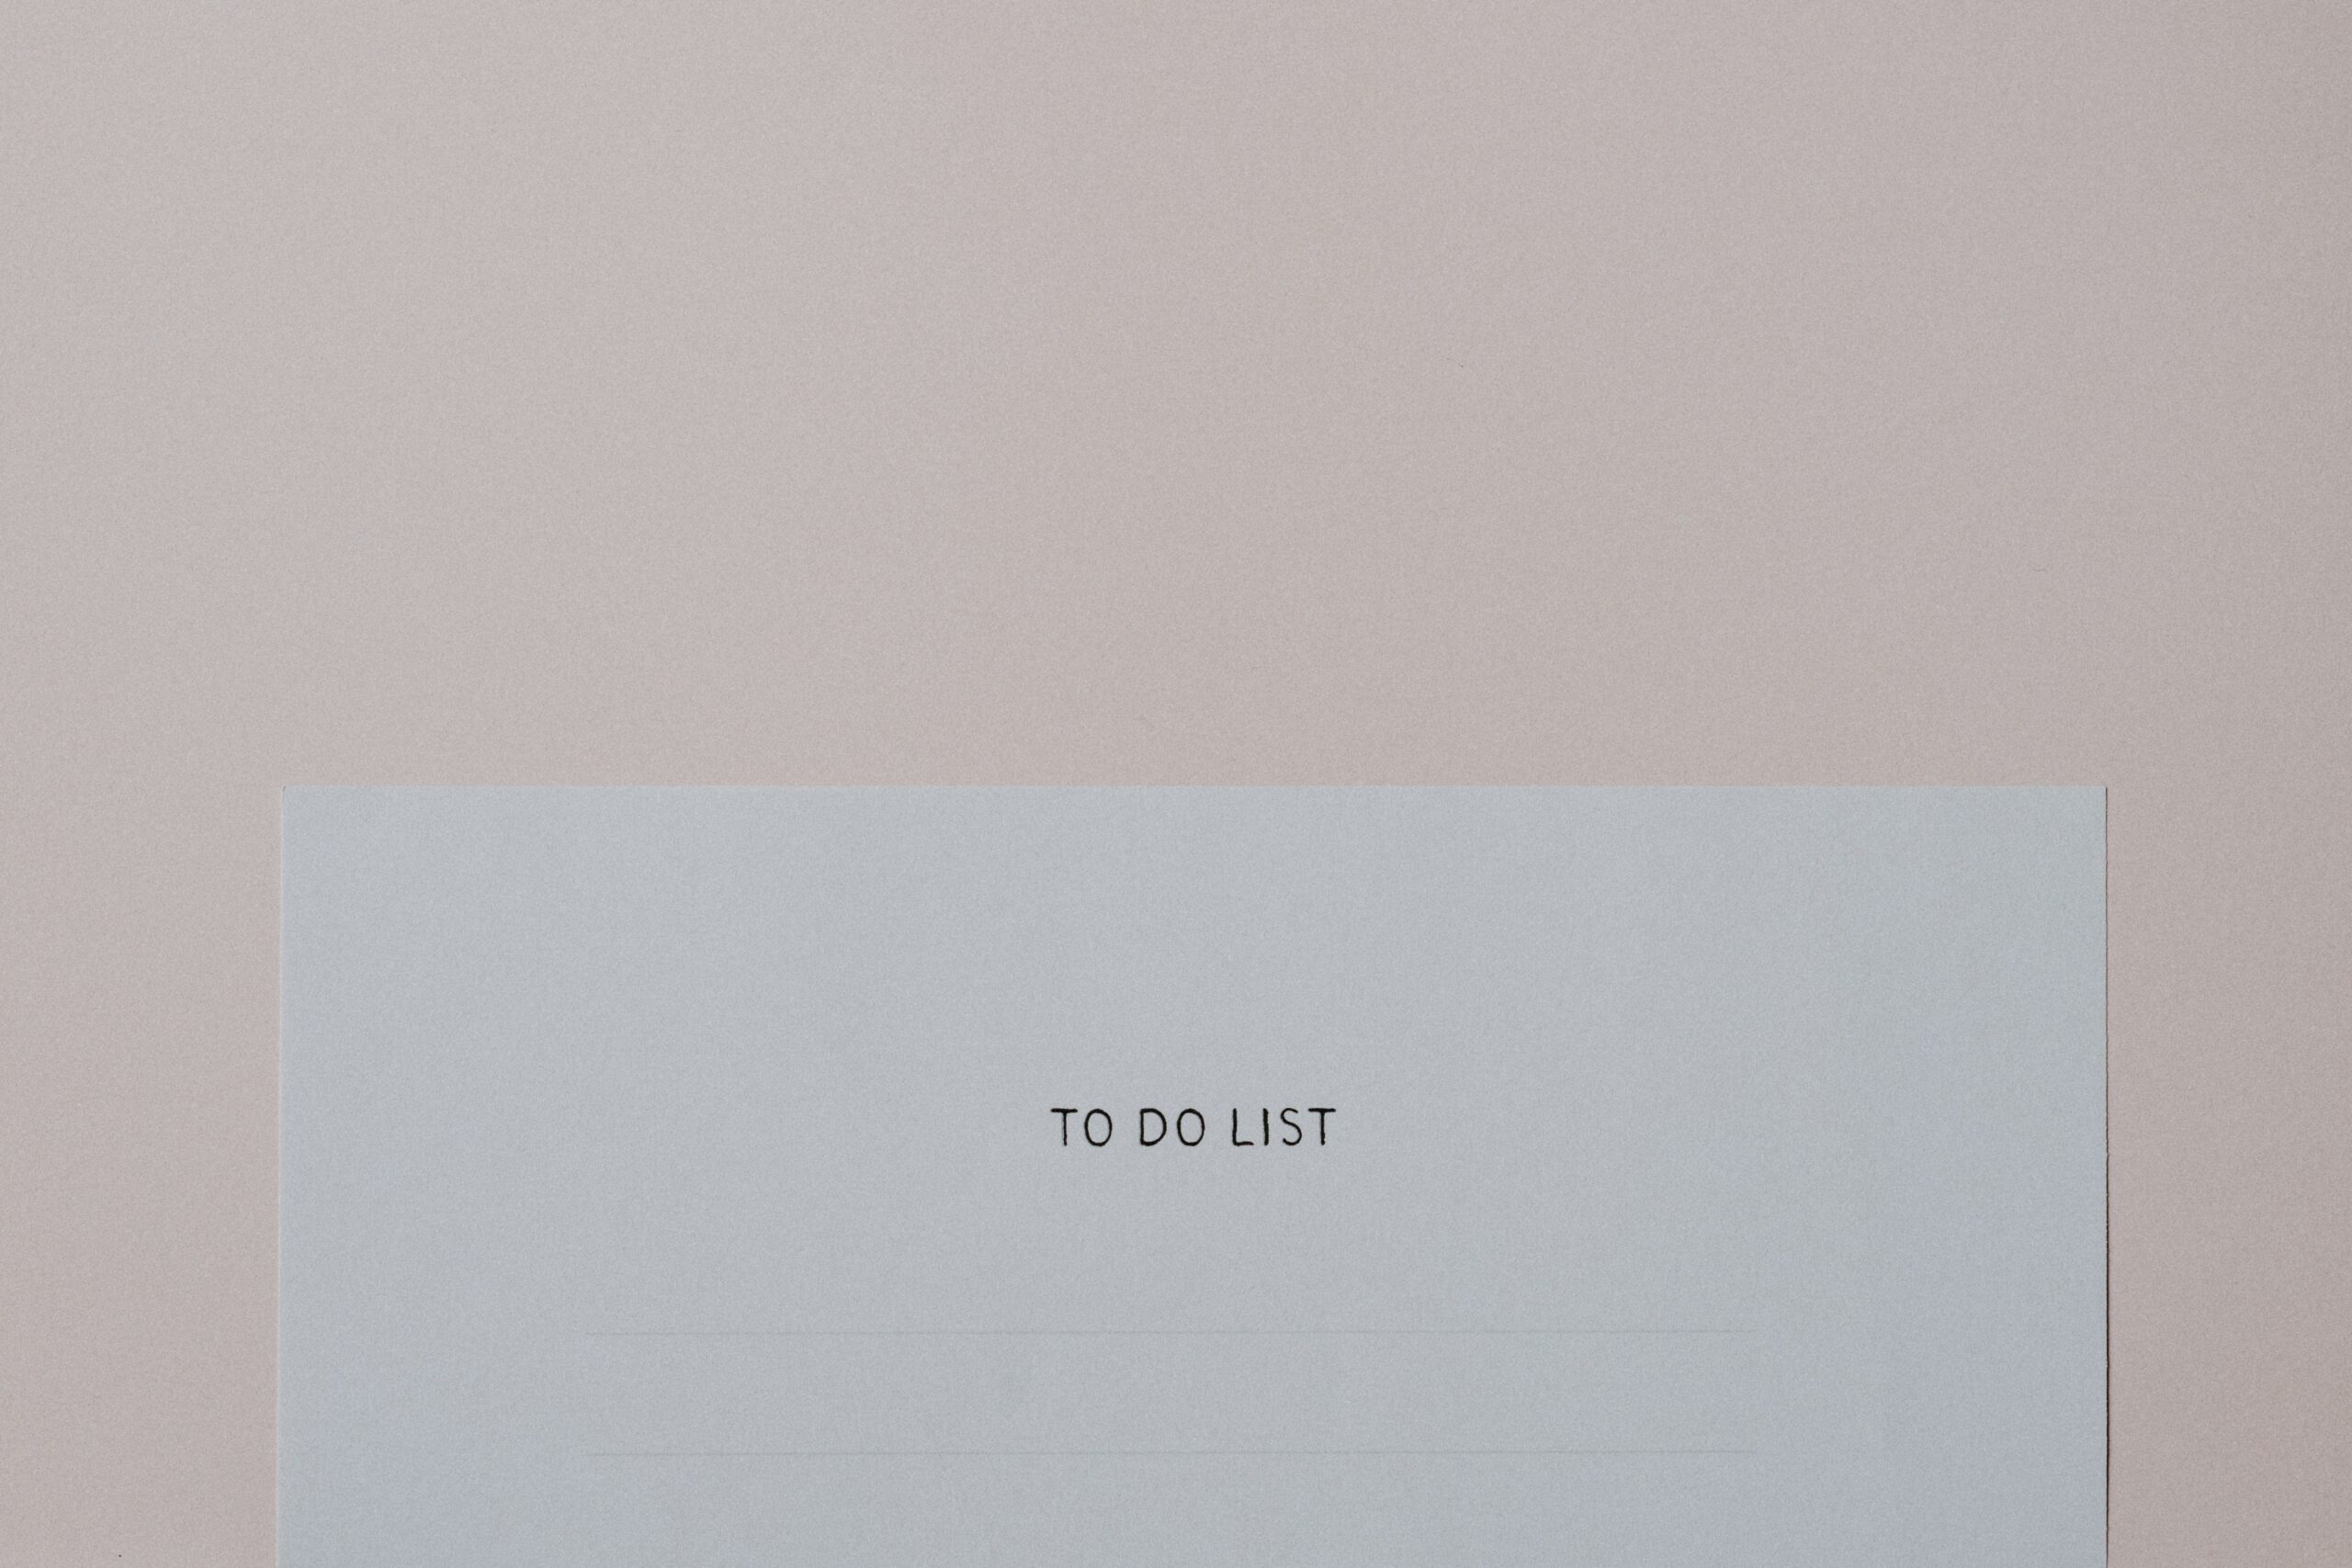 Unsplash image of a piece of paper titled "To Do List"